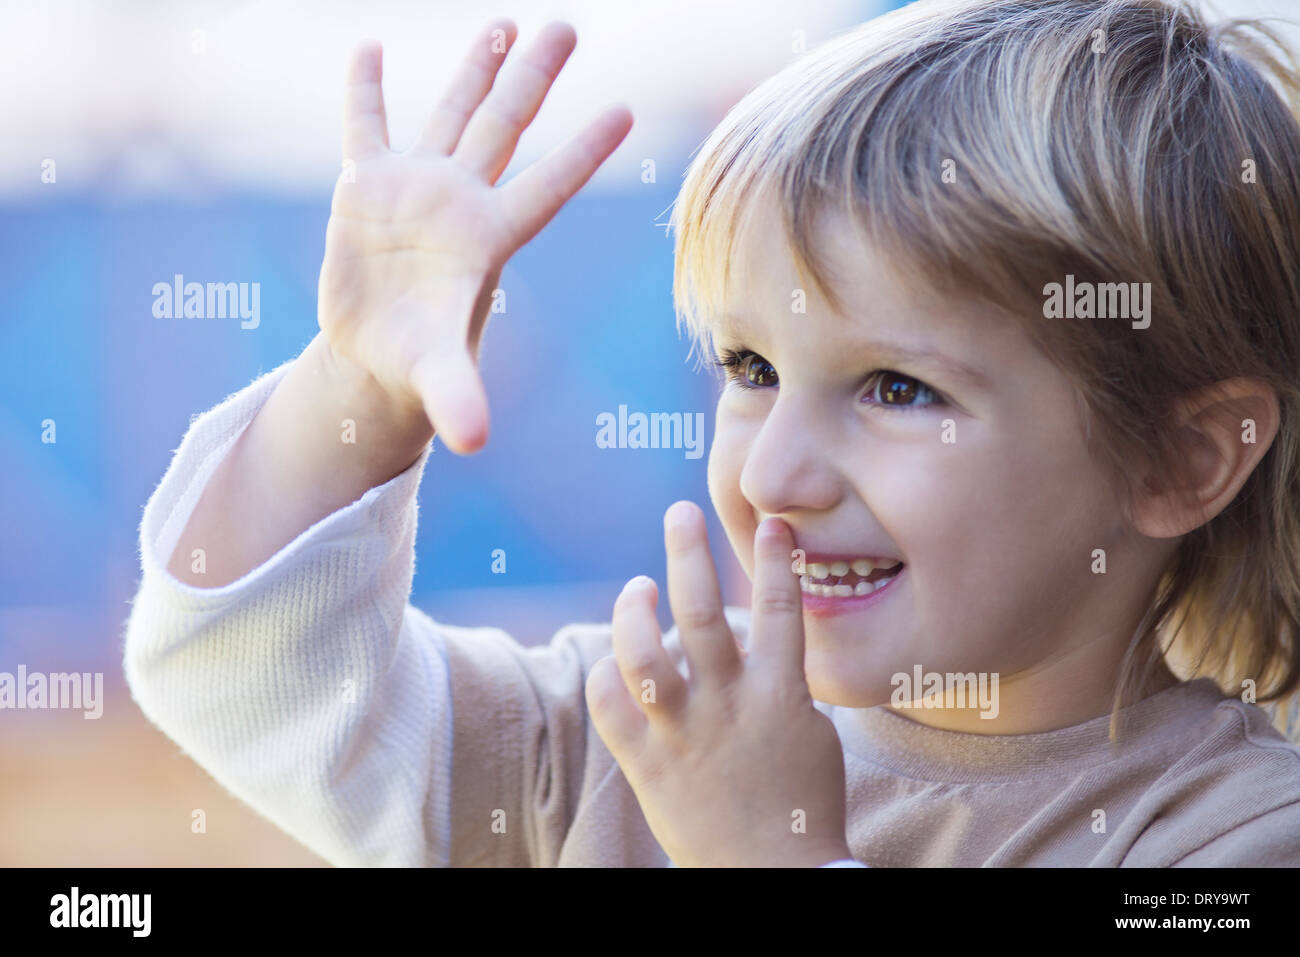 Child holding out five fingers Stock Photo